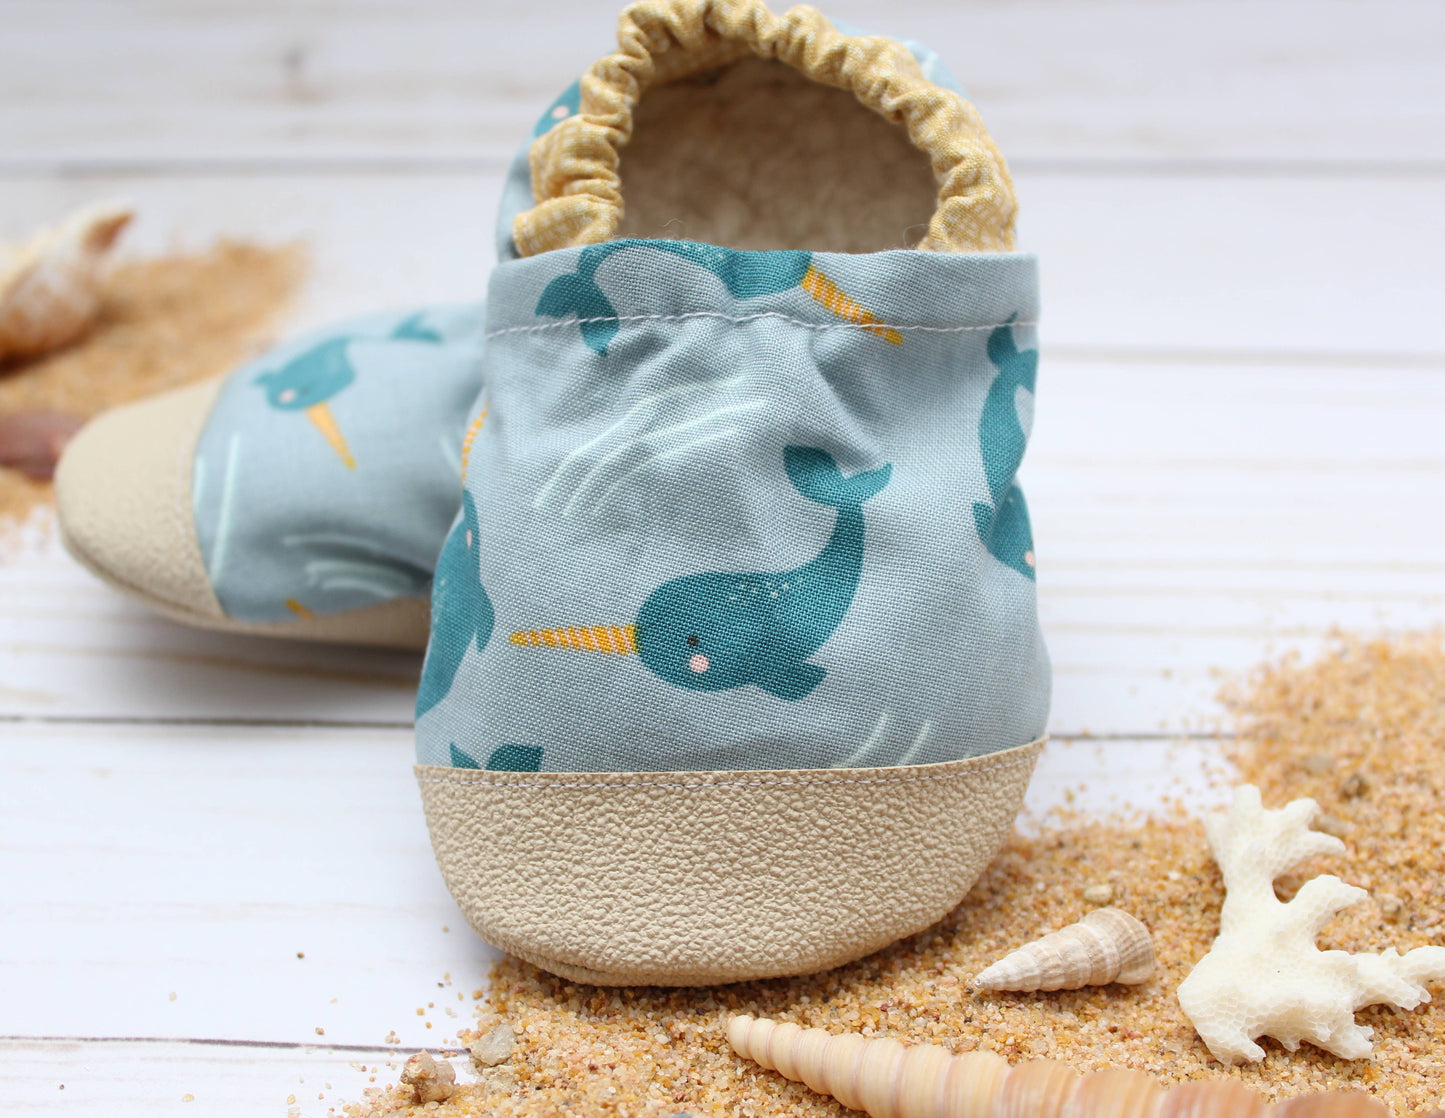 Scooter Booties - Narwhals Baby Shoes: 3 Toddler